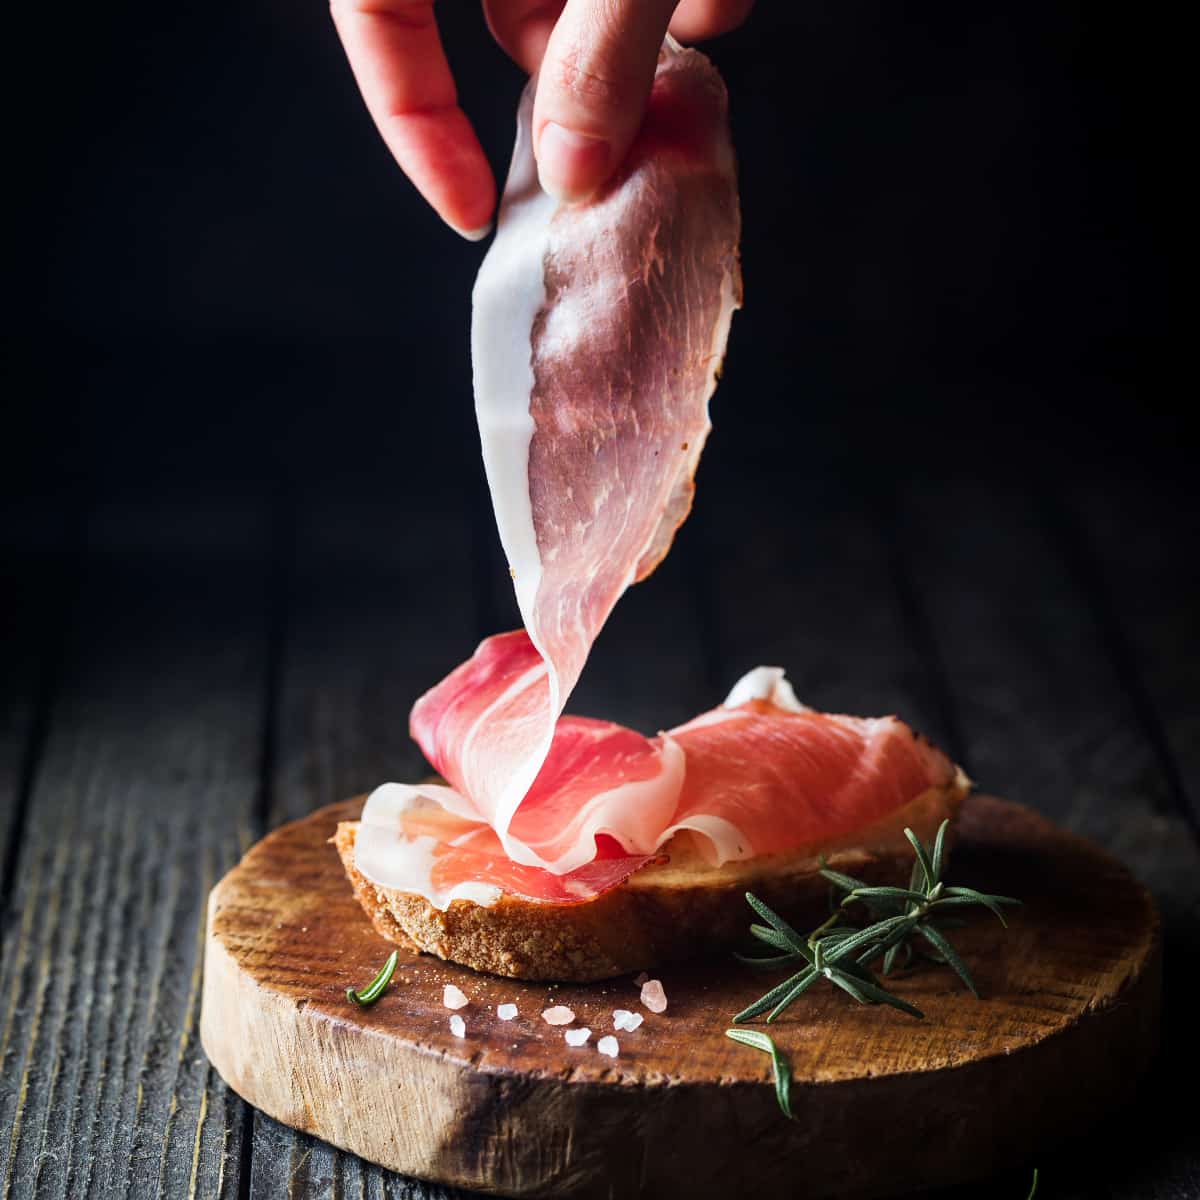 Prosciutto being placed on a wooden circle charcuterie board